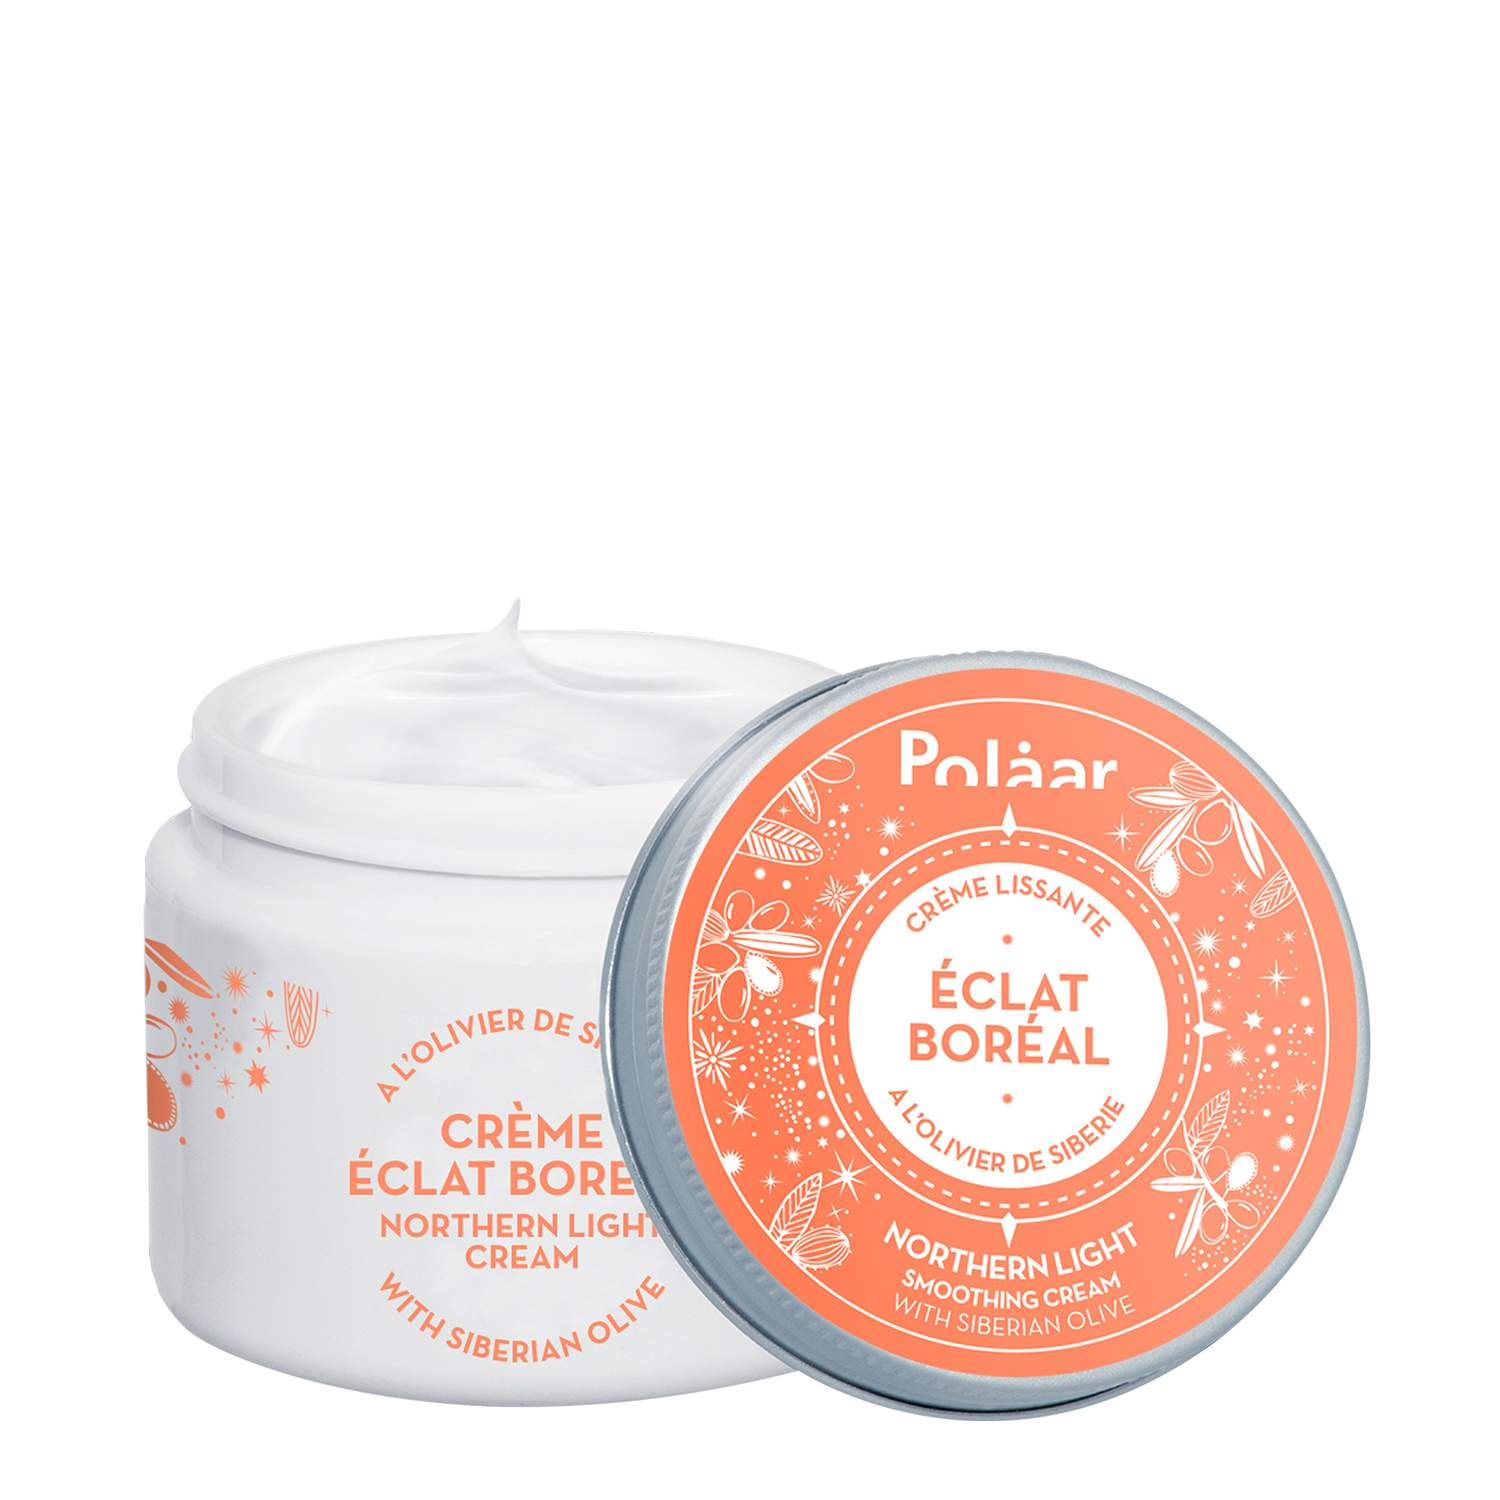 Polaar Northern Light Smoothing Cream with Siberian Olive Tree